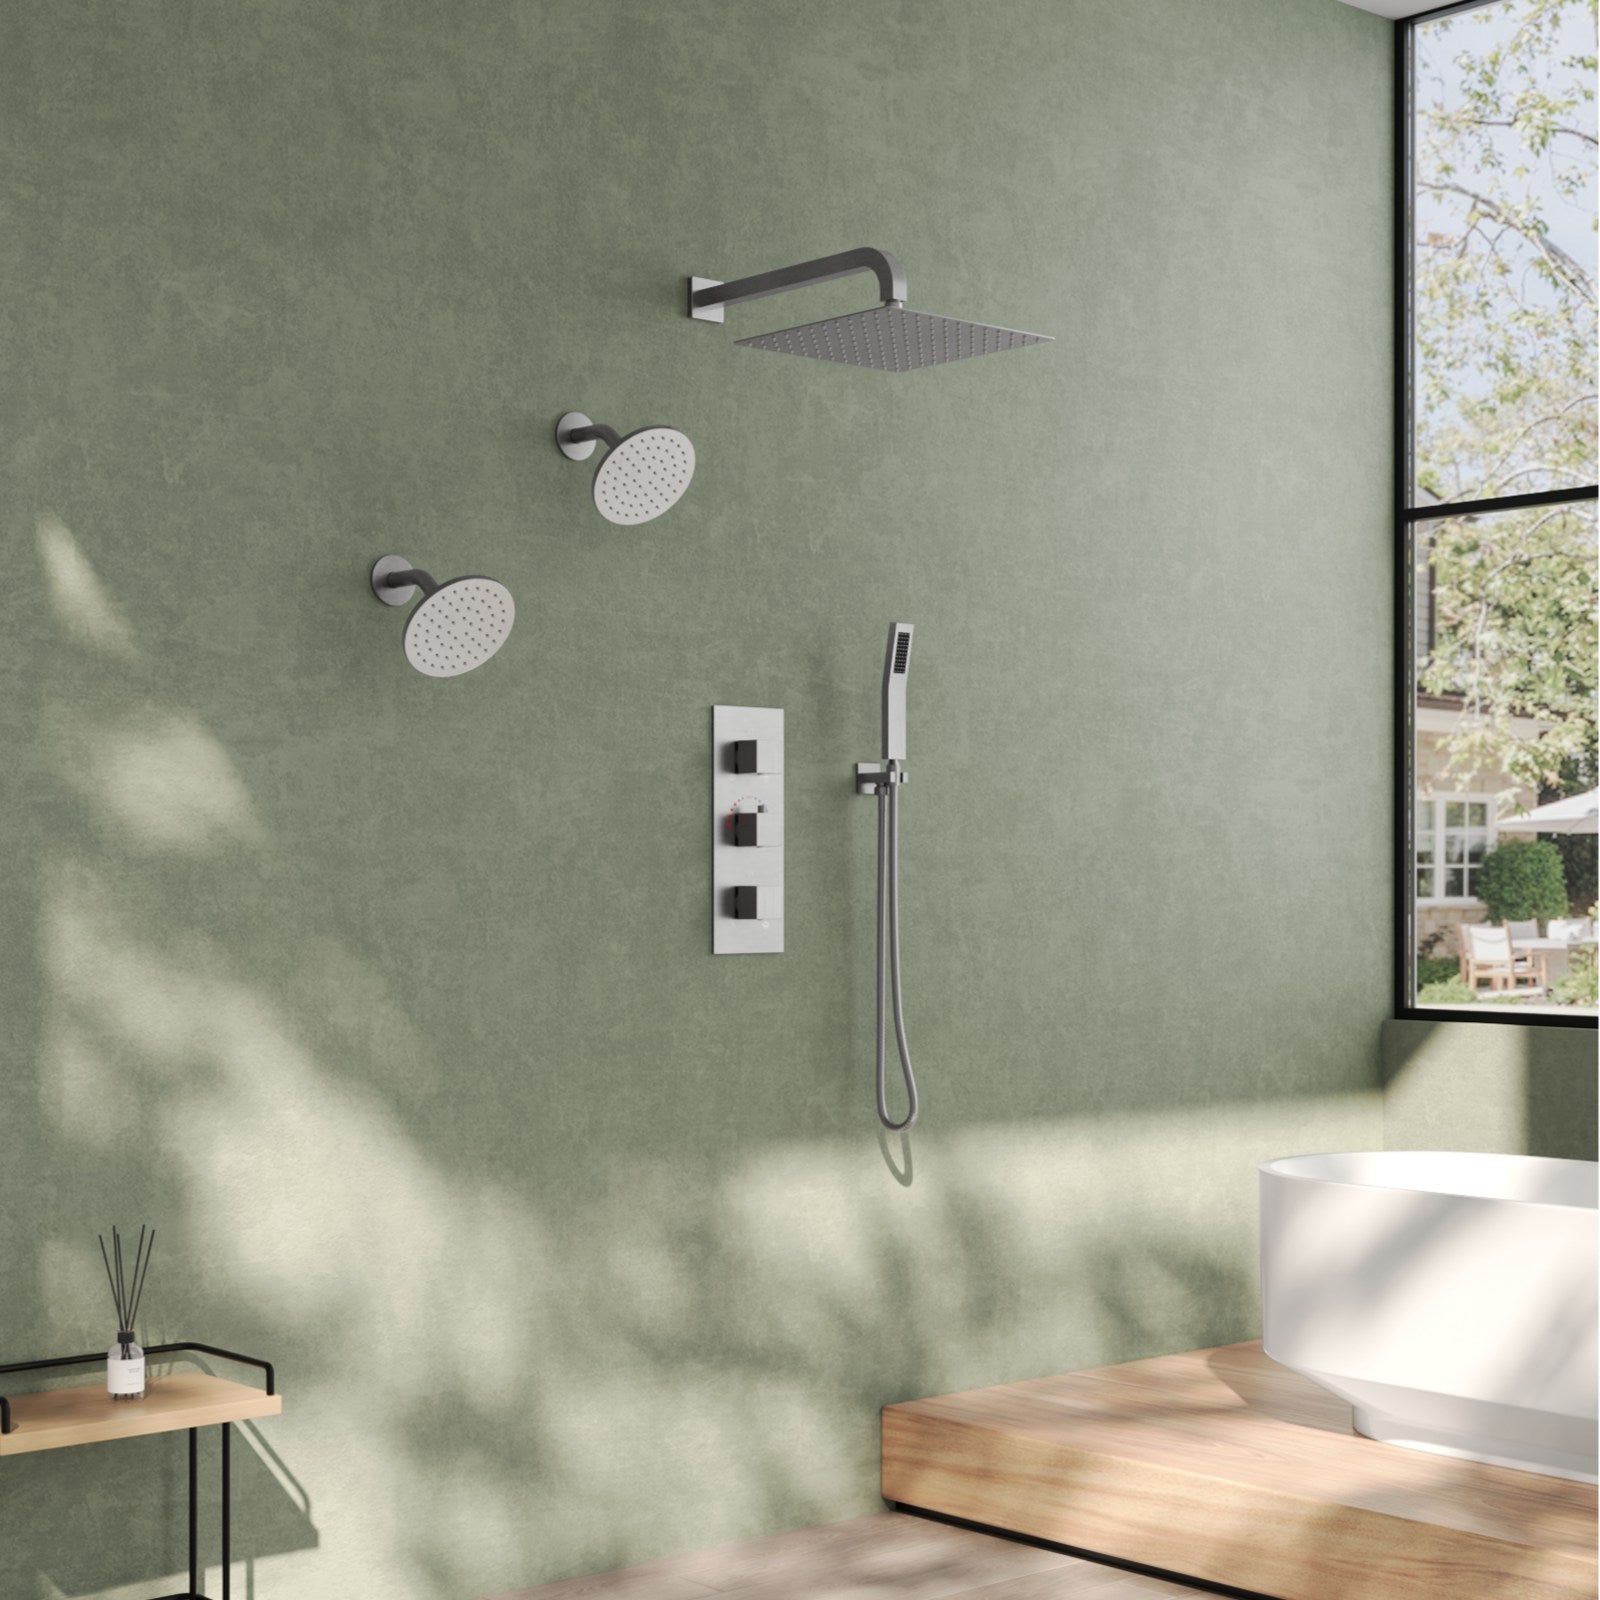 EVERSTEIN SFS-1066-NK12 12" High-Pressure Rainfall Complete Shower System with Rough-in Valve